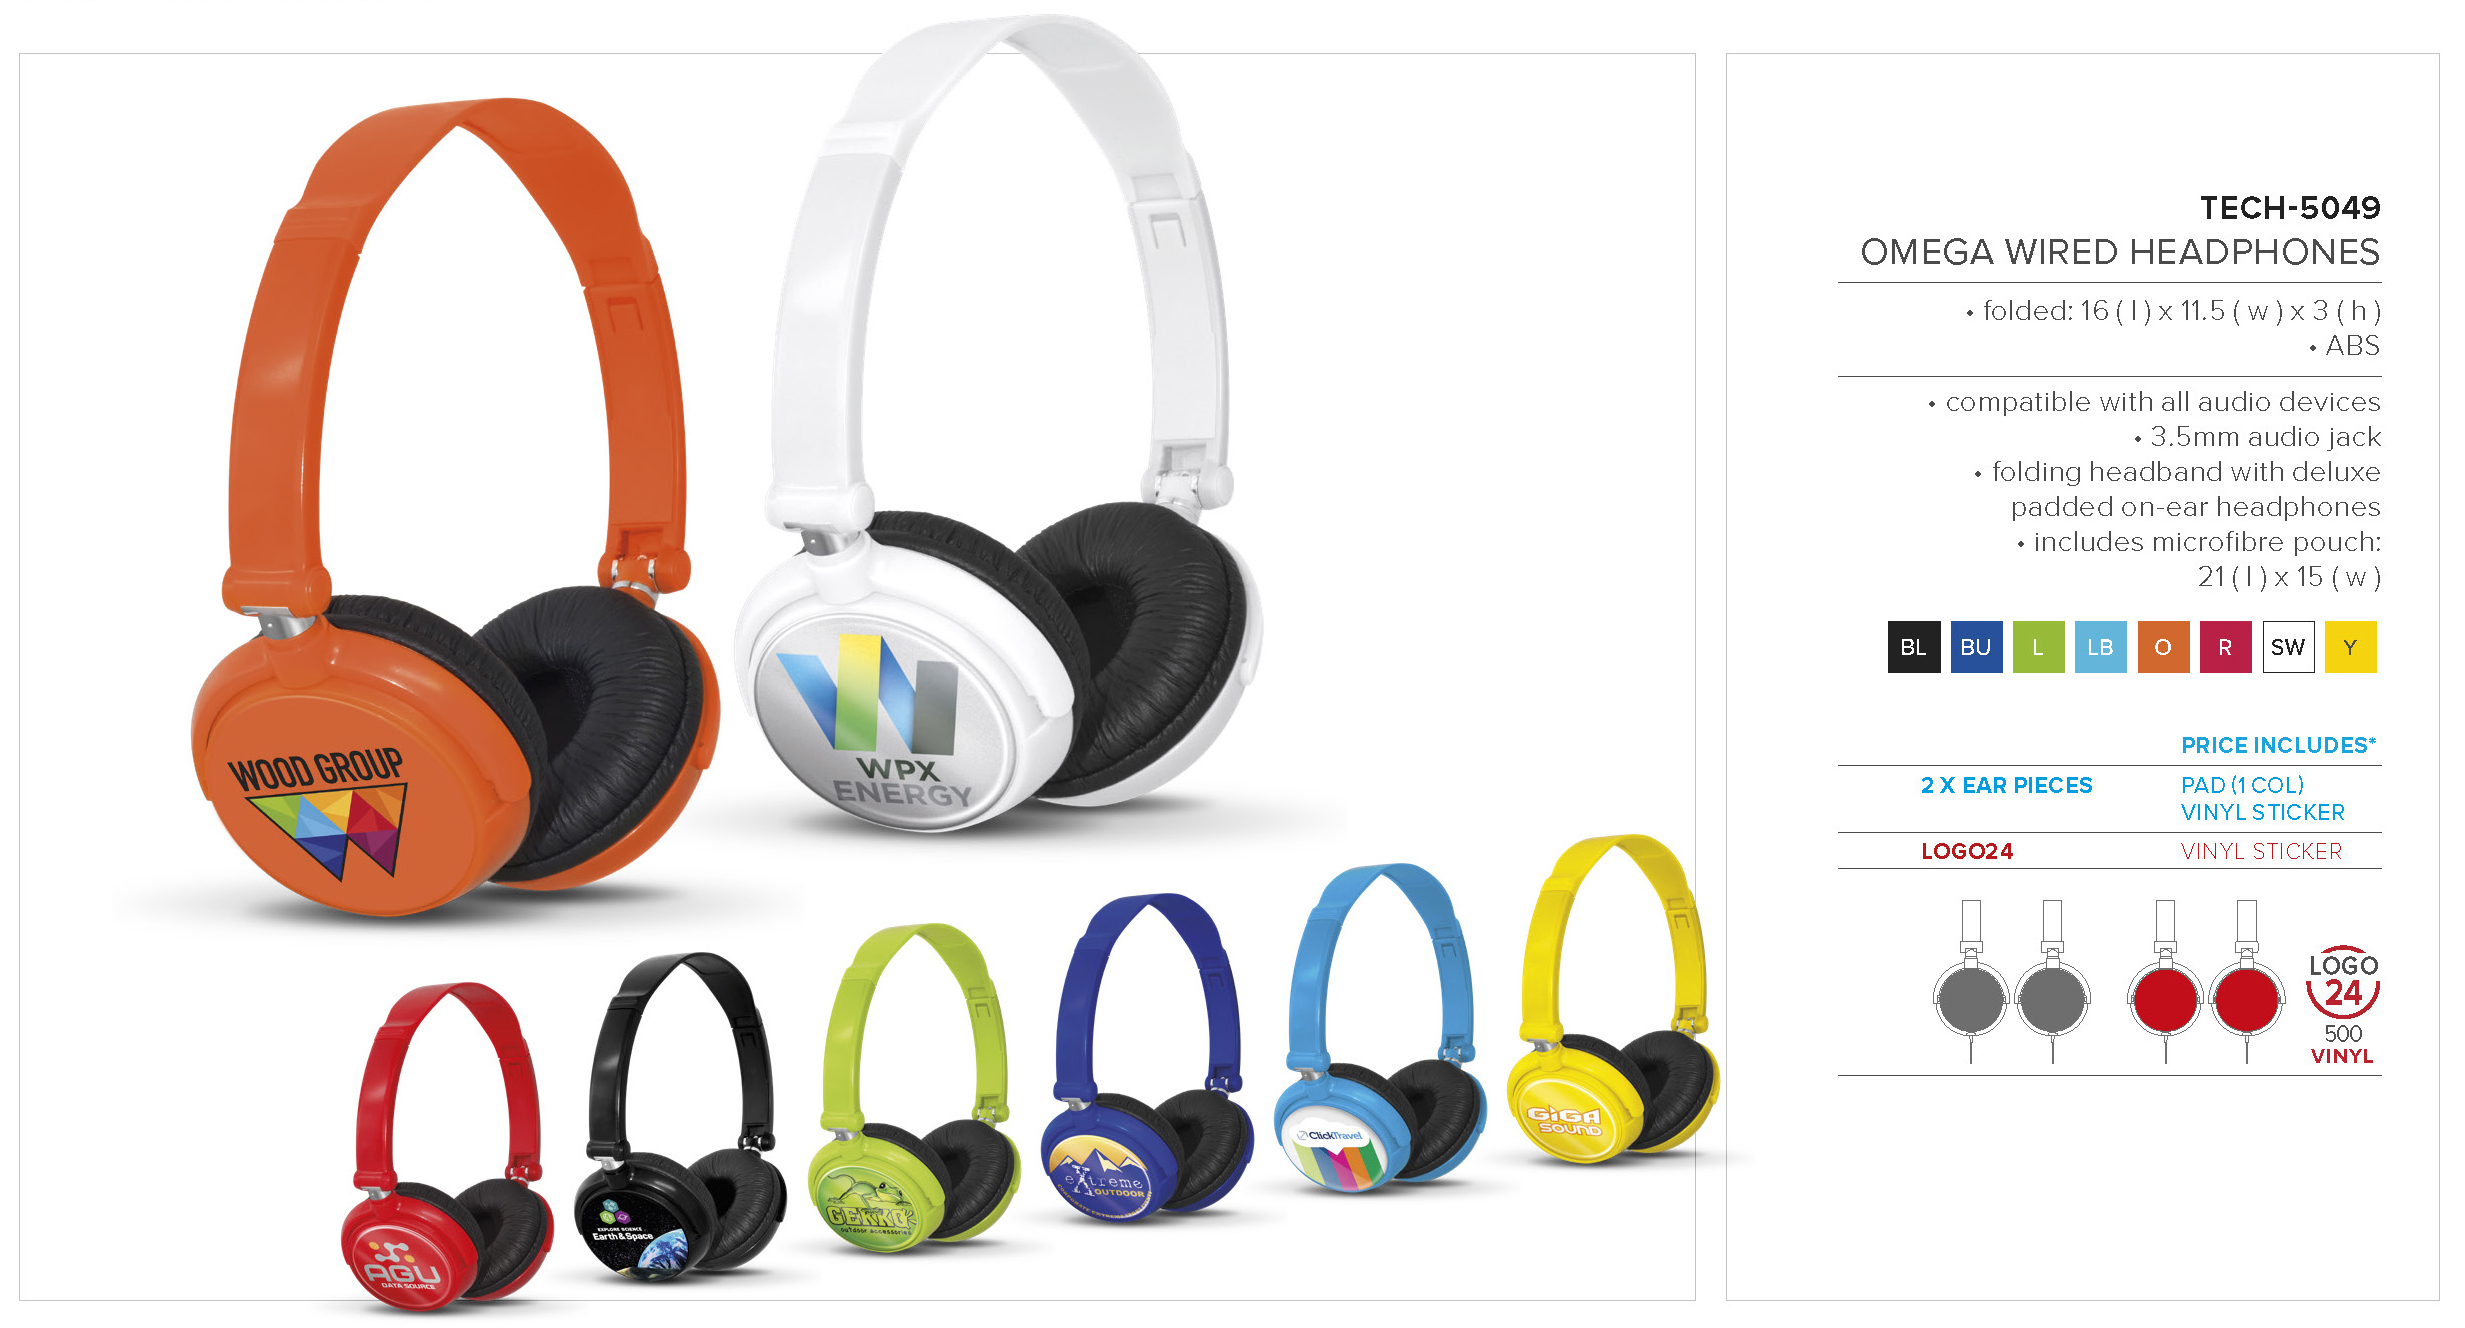 TECH-5049 - Omega Wired Headphones - Catalogue Image